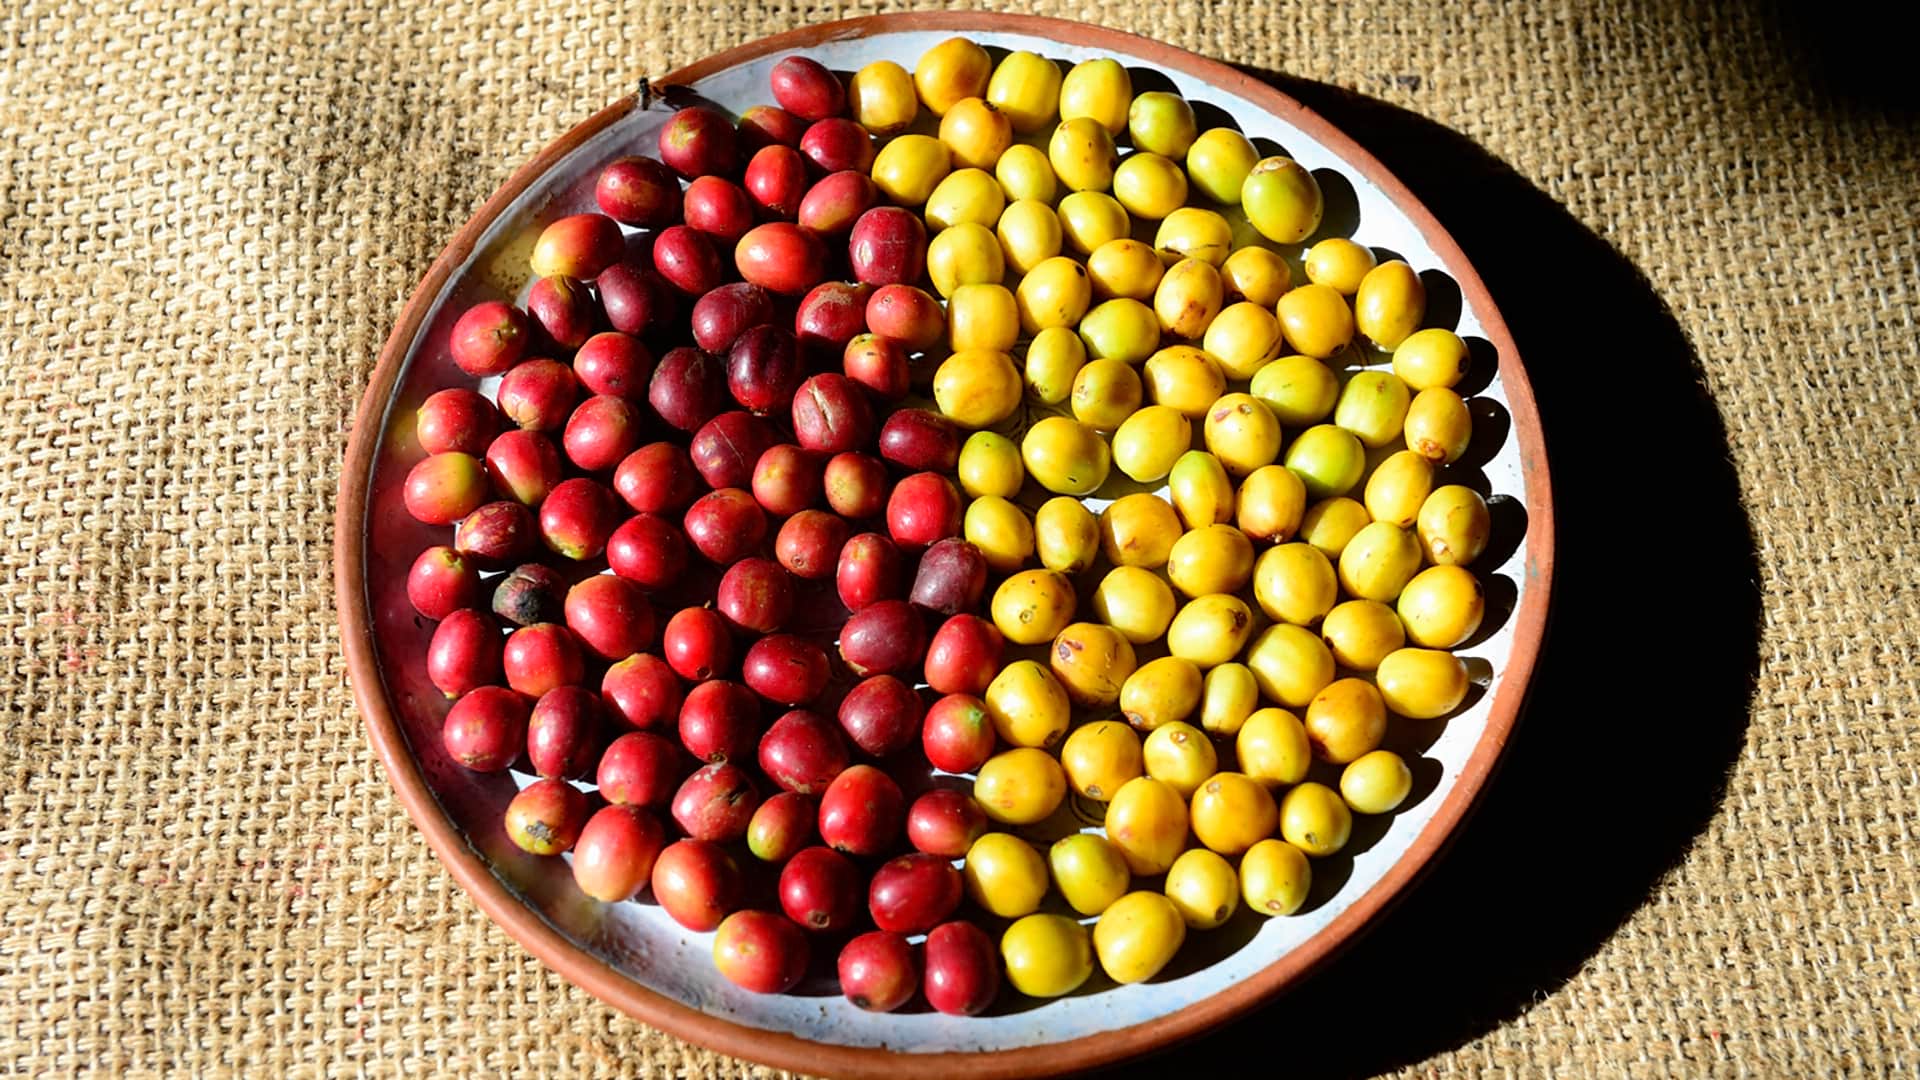 11Red and yellow coffee beans - RESPONSible Travel Peru